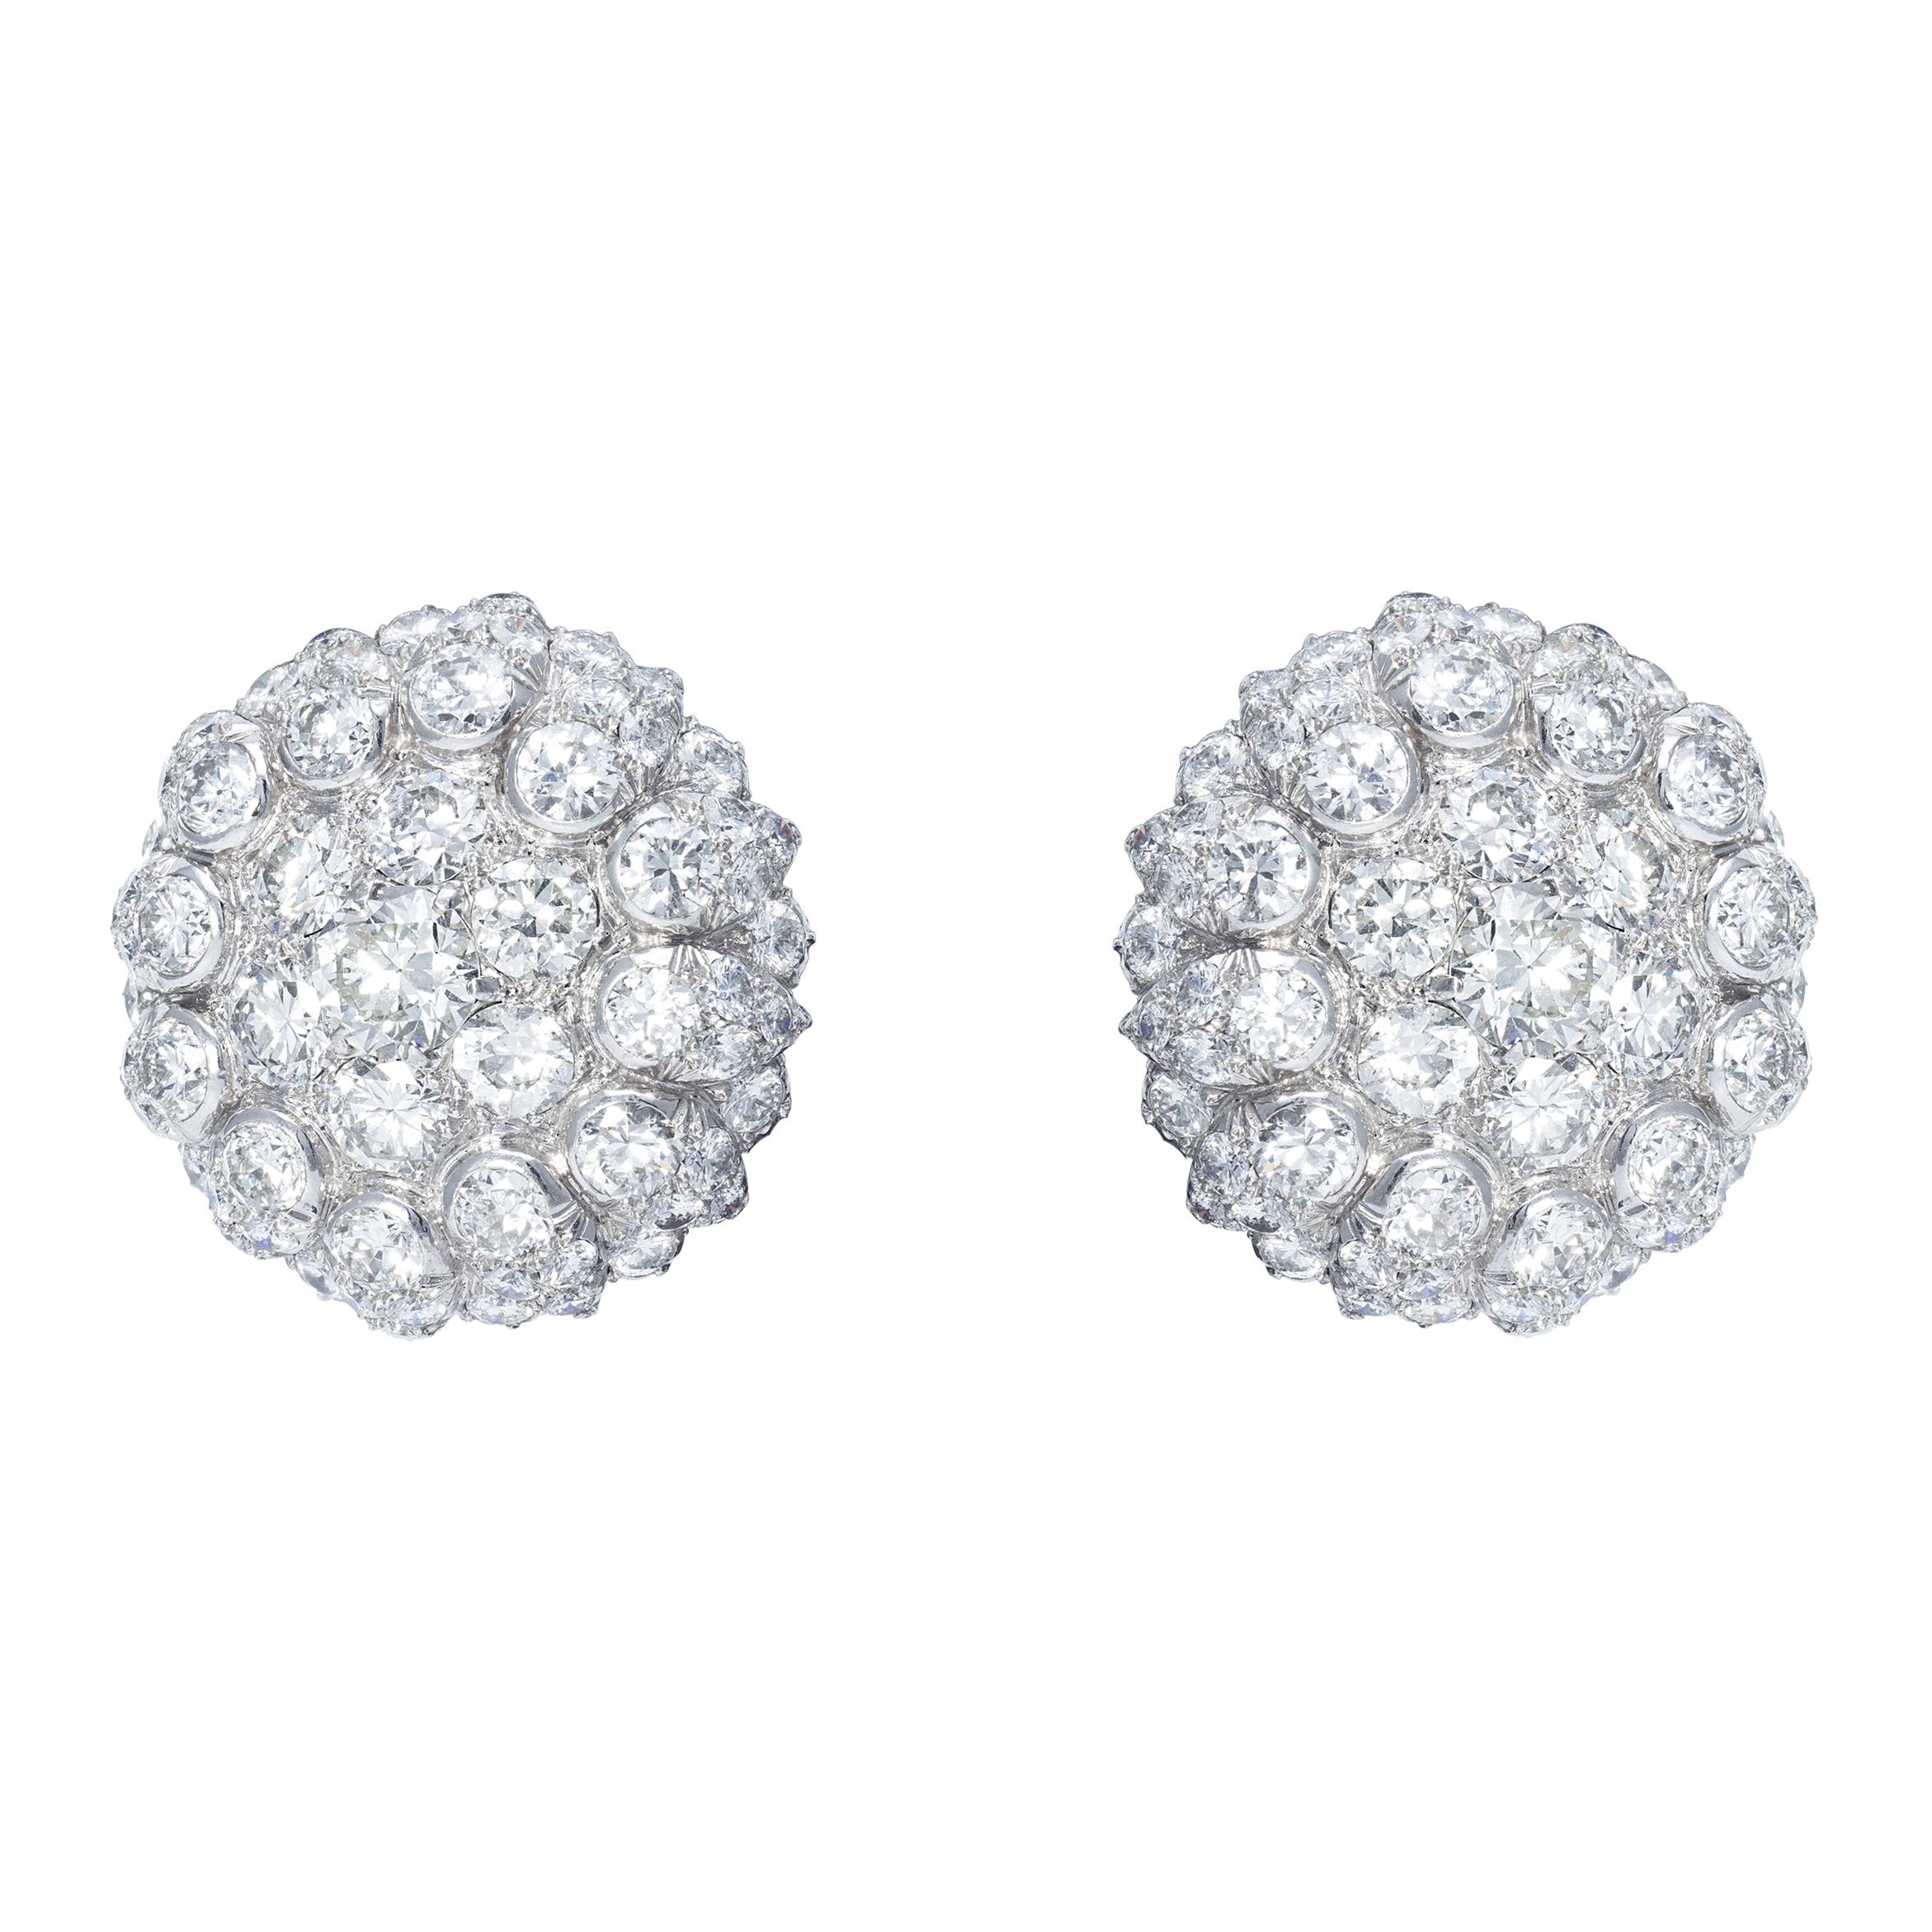 1950 White Gold and Diamonds Earrings